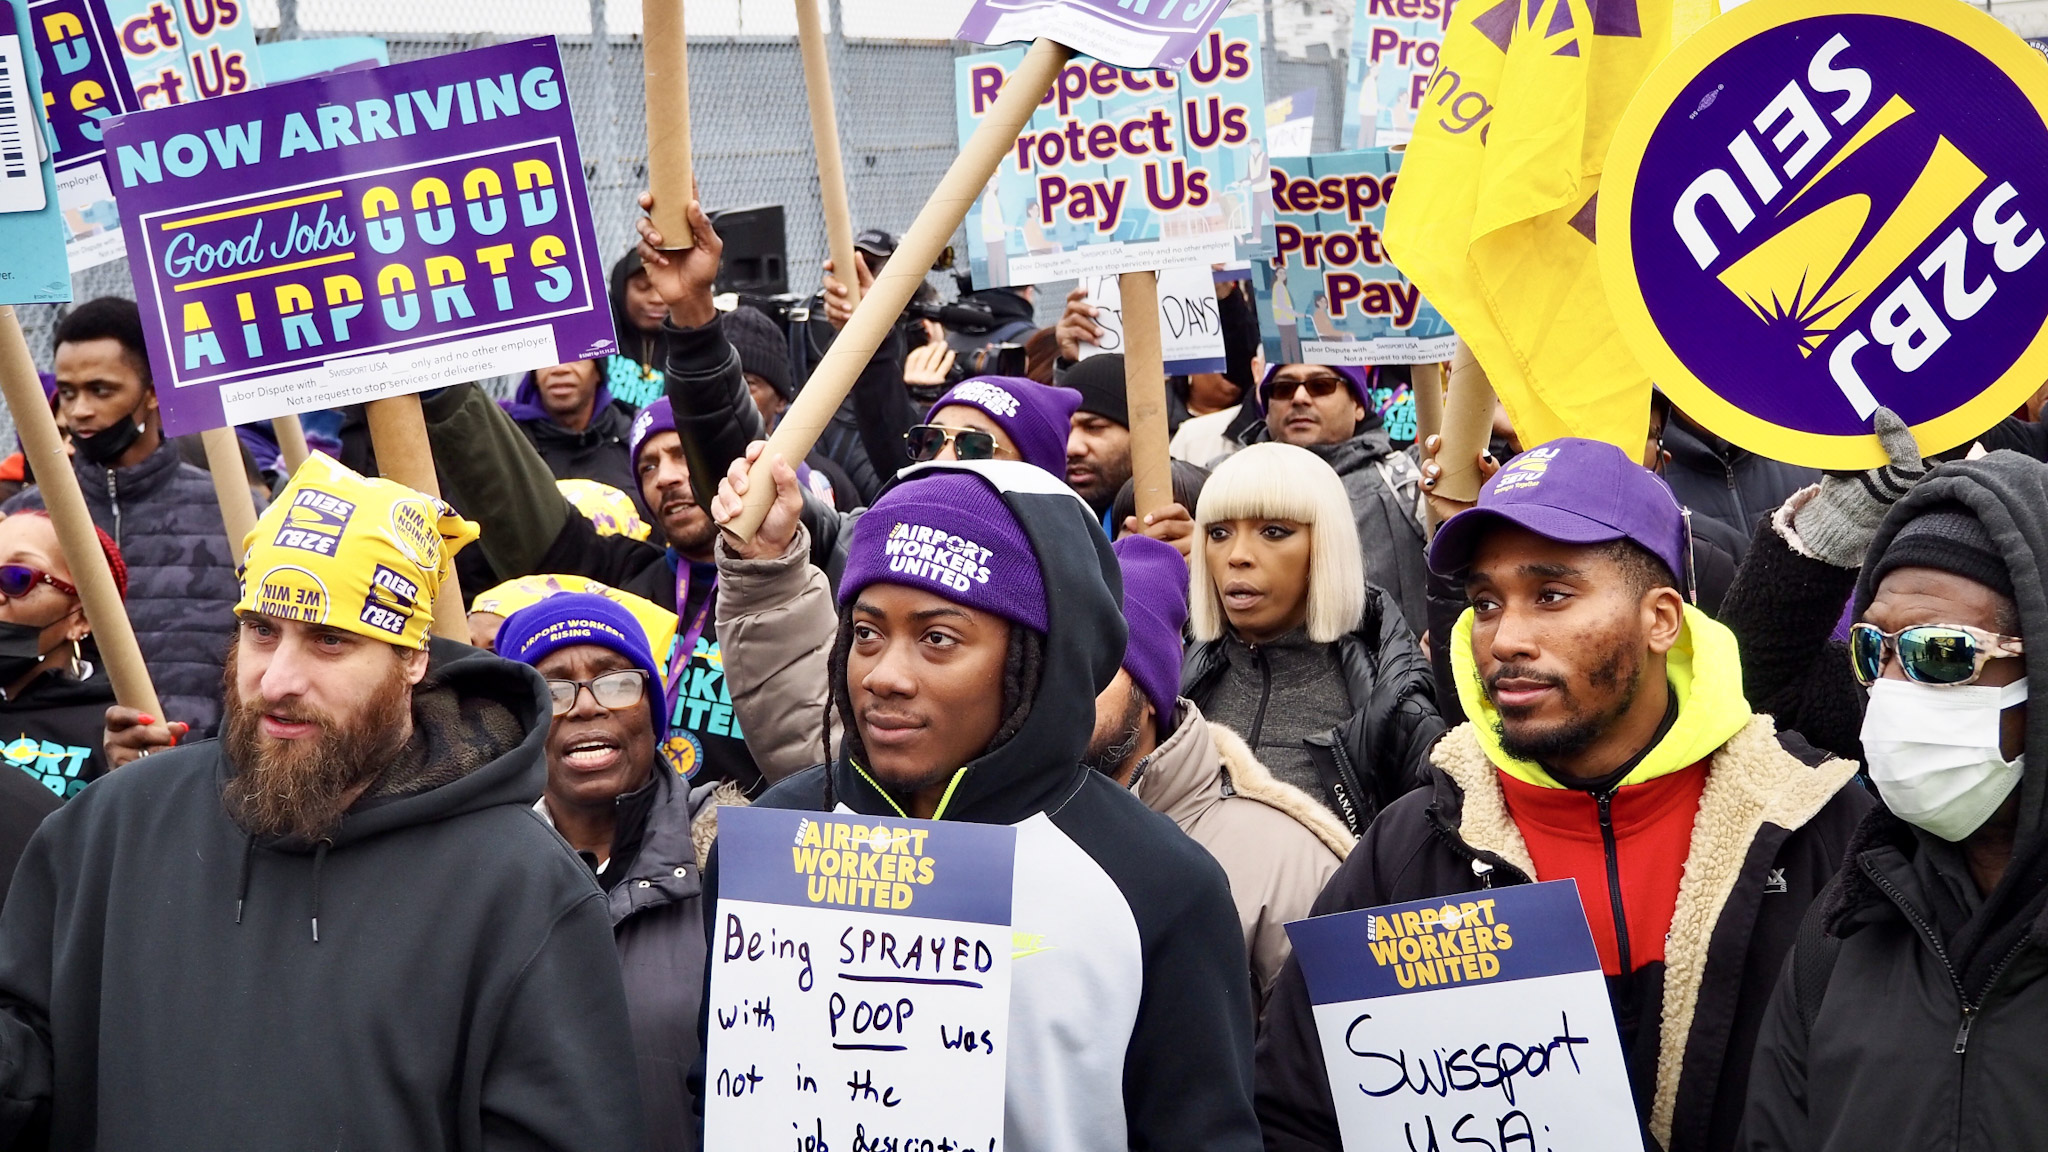 Swissport LaGuardia Airport Workers Announce StrikeDocumented